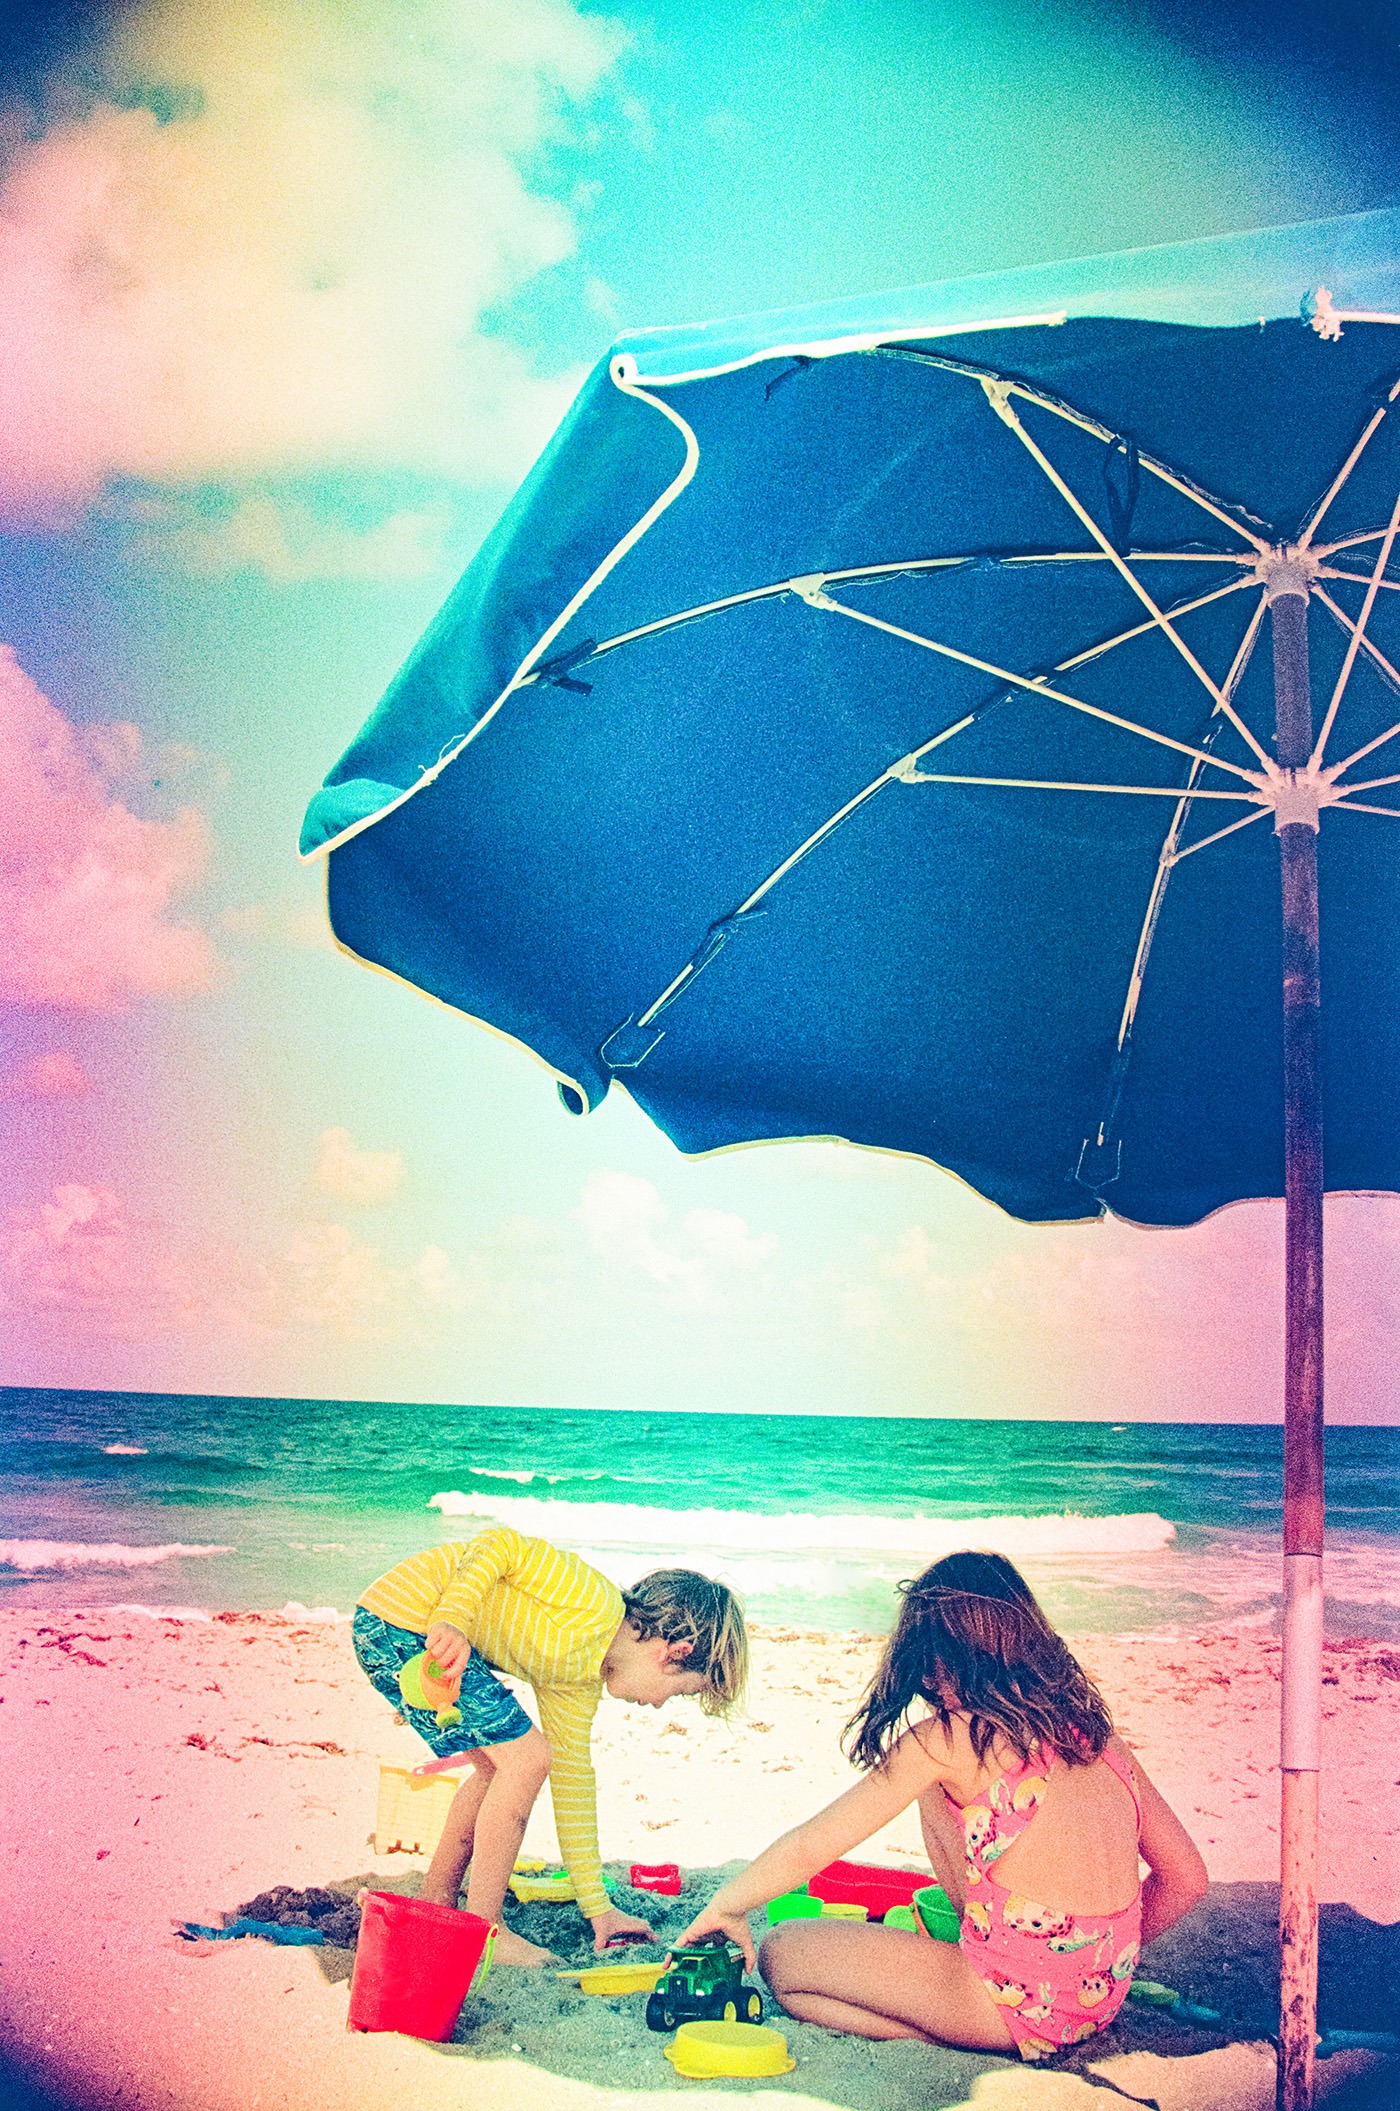 dreamy image of children playing in the sand under a beach umbrella at the ocean, "film soup" technique on 35mm film